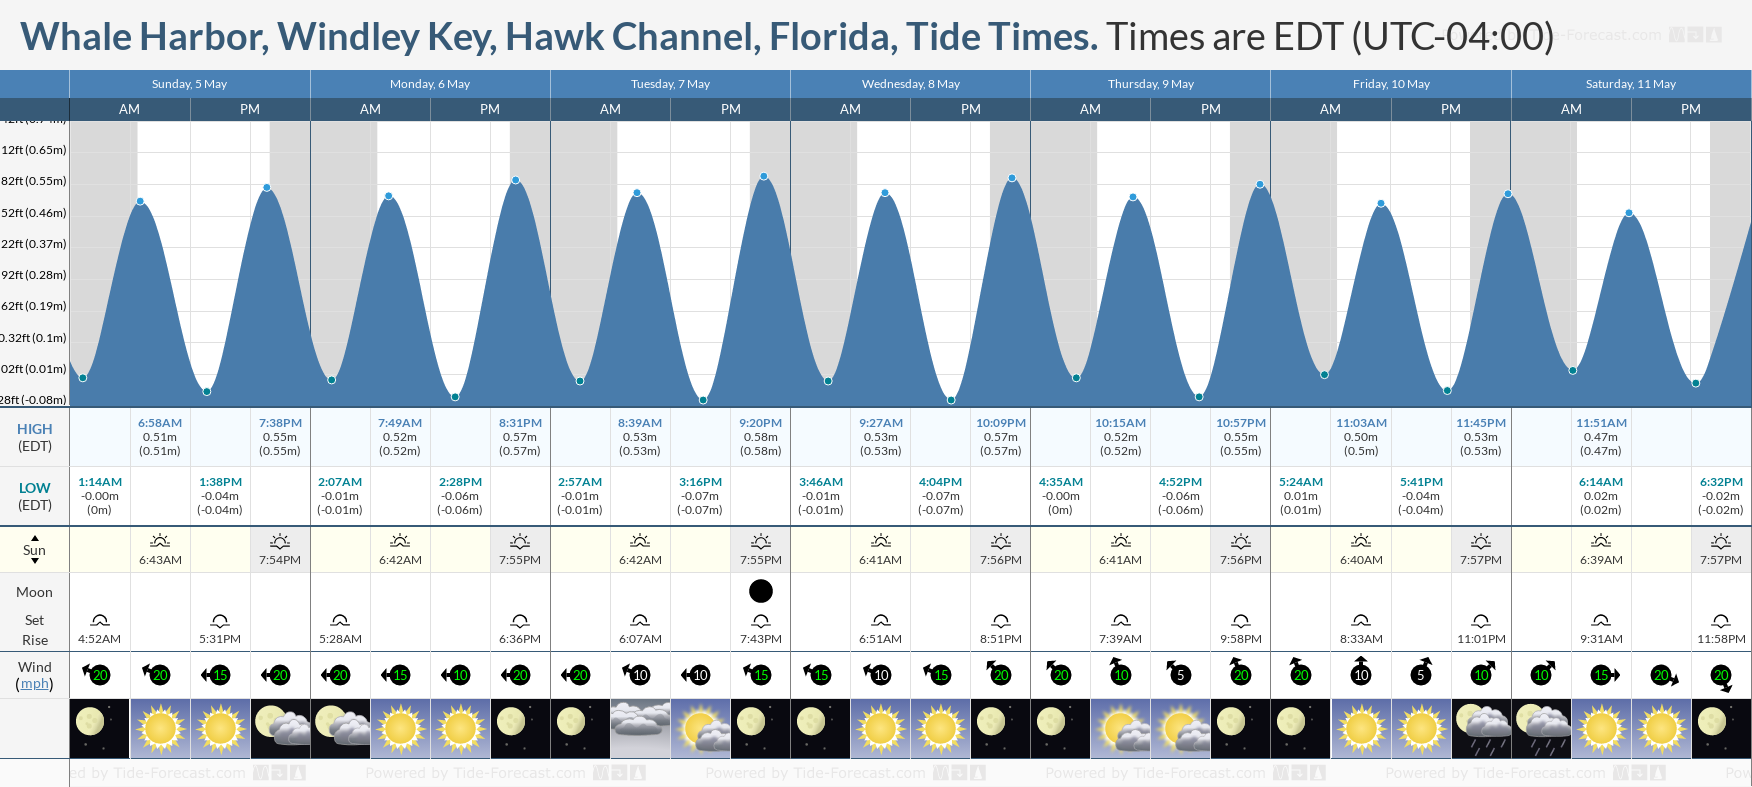 Whale Harbor, Windley Key, Hawk Channel, Florida Tide Chart including high and low tide tide times for the next 7 days